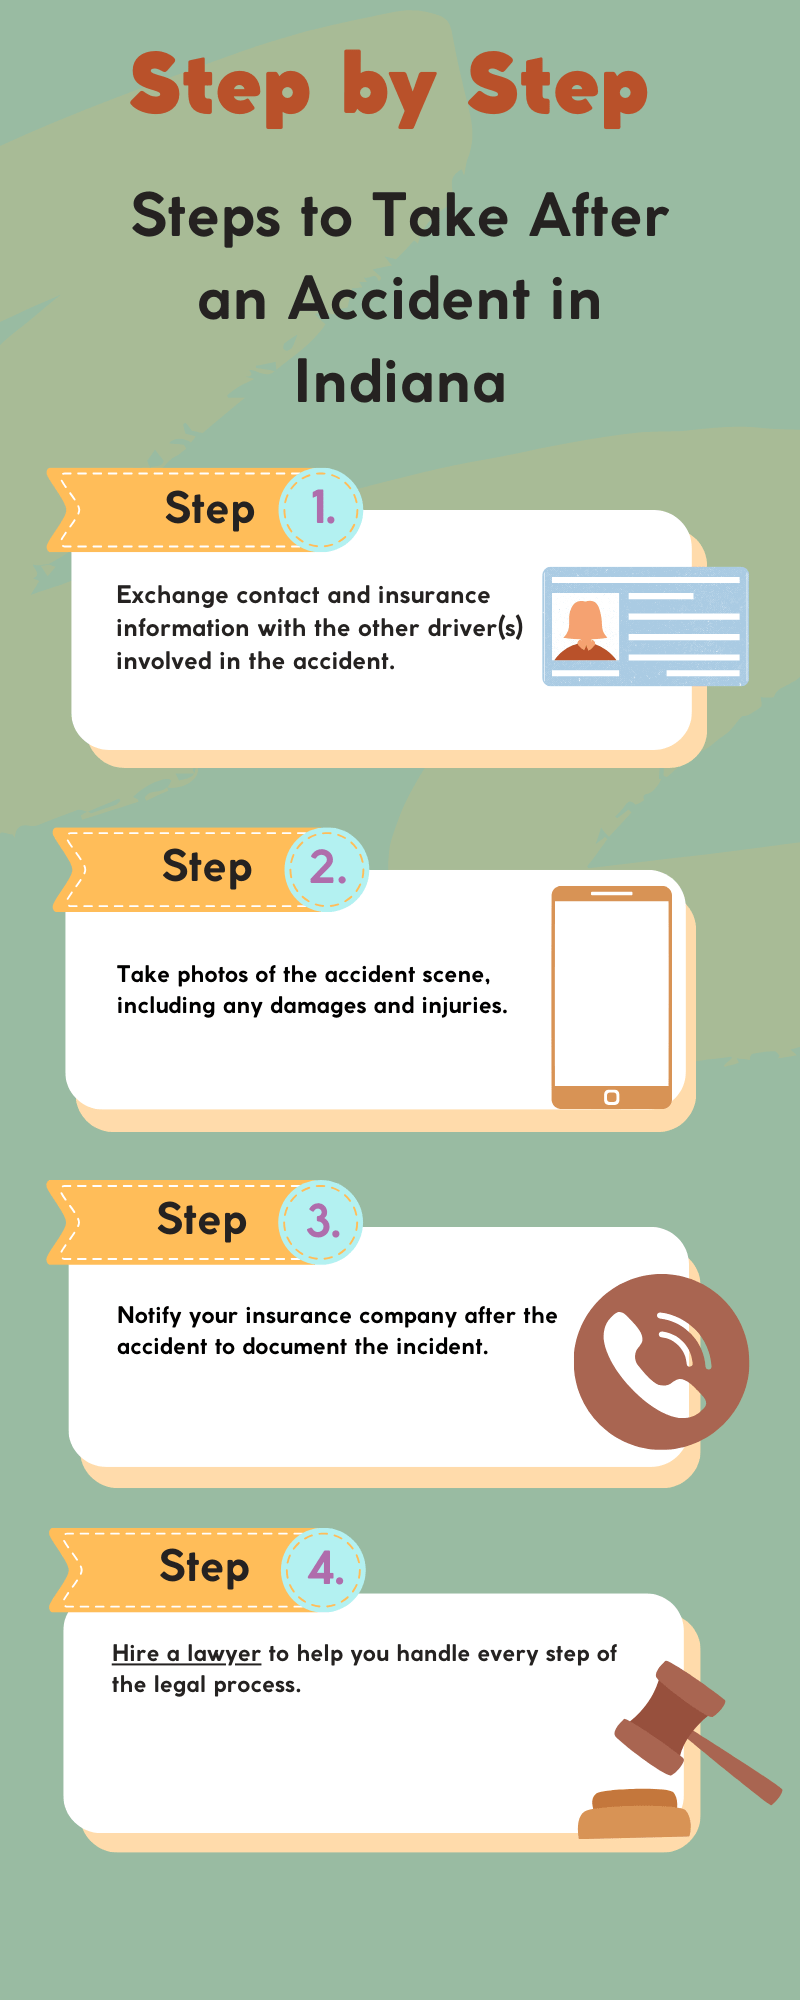 steps to take after a car accident in indiana infographic